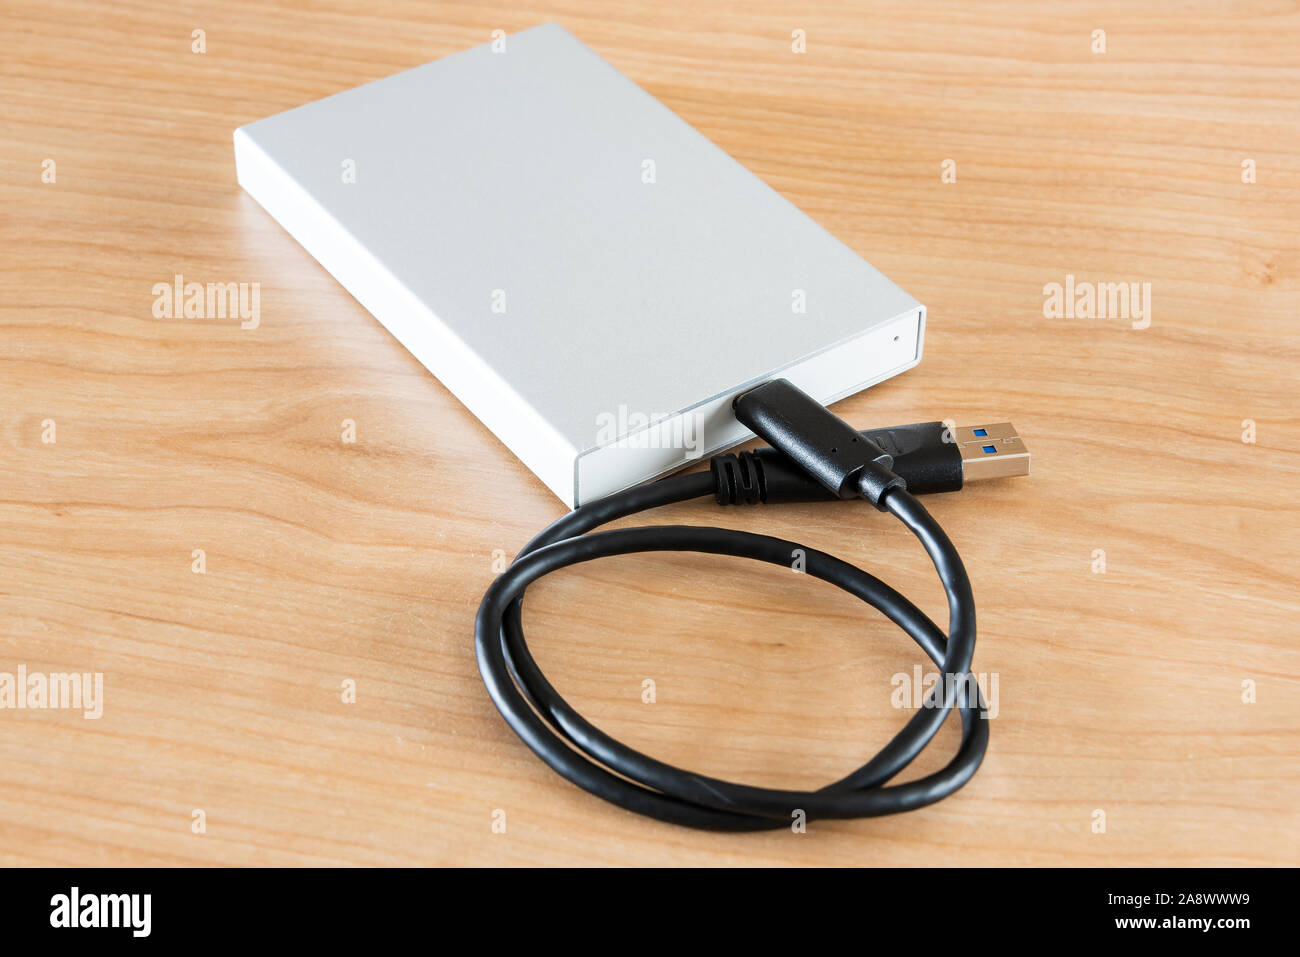 An external hard drive to connect to a laptop computer for data transfer or data backup. Stock Photo